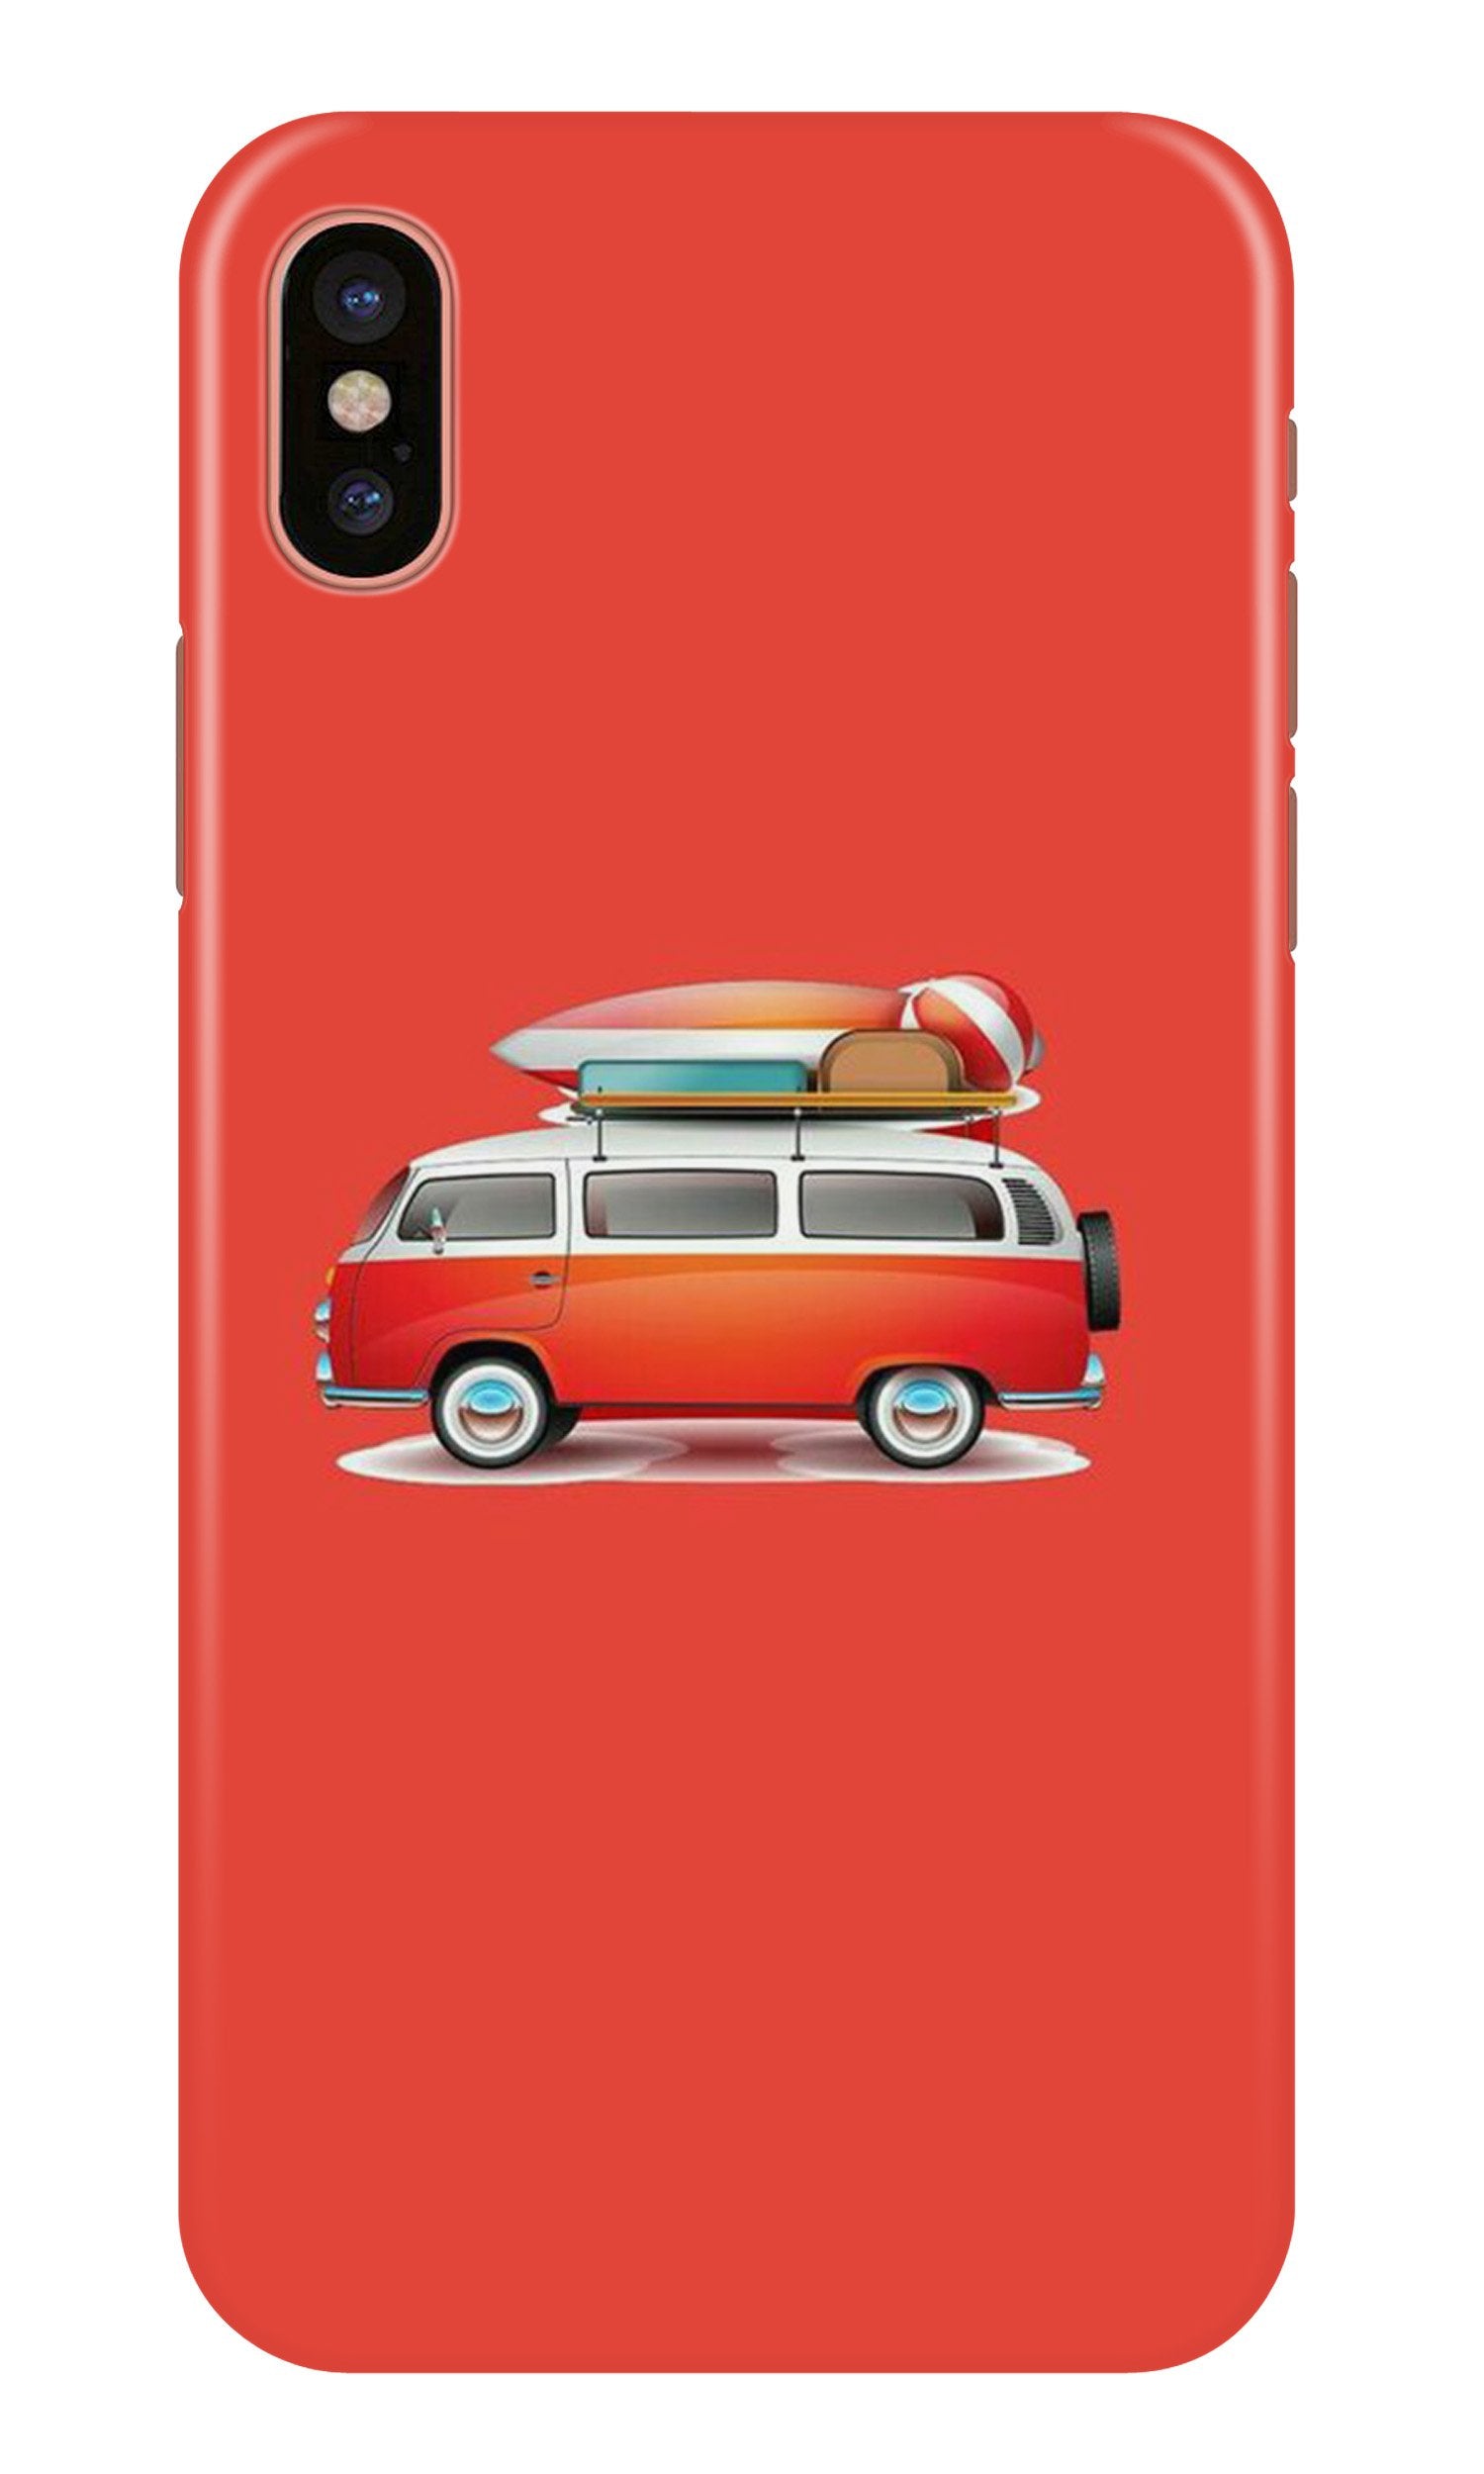 Travel Bus Case for iPhone X (Design No. 258)